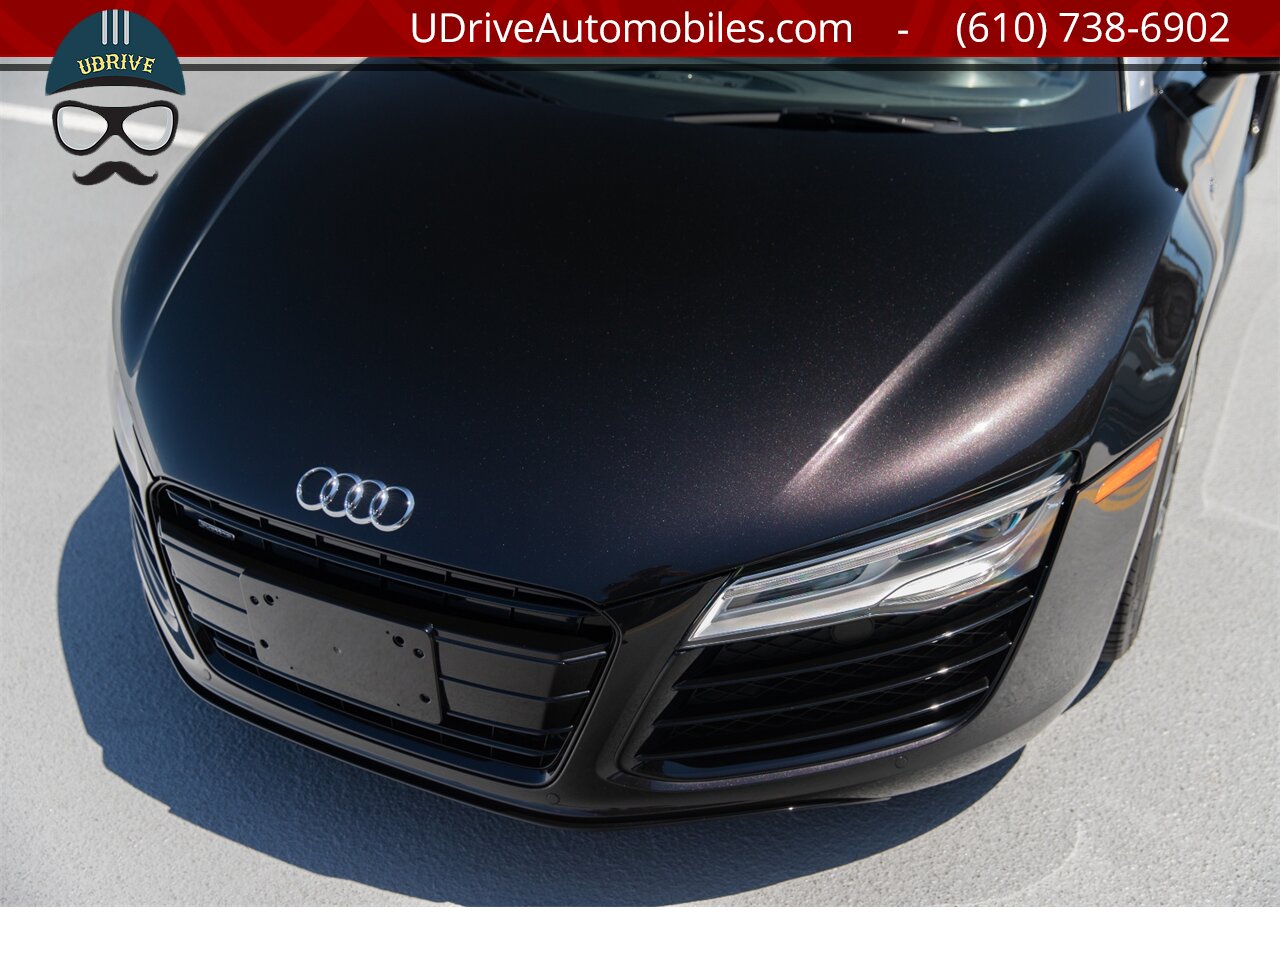 2014 Audi R8 5.2 V10 Quattro Spyder 6 Speed Manual 2k Miles  Extremely RARE 1 of 1 Color Combo - Photo 10 - West Chester, PA 19382